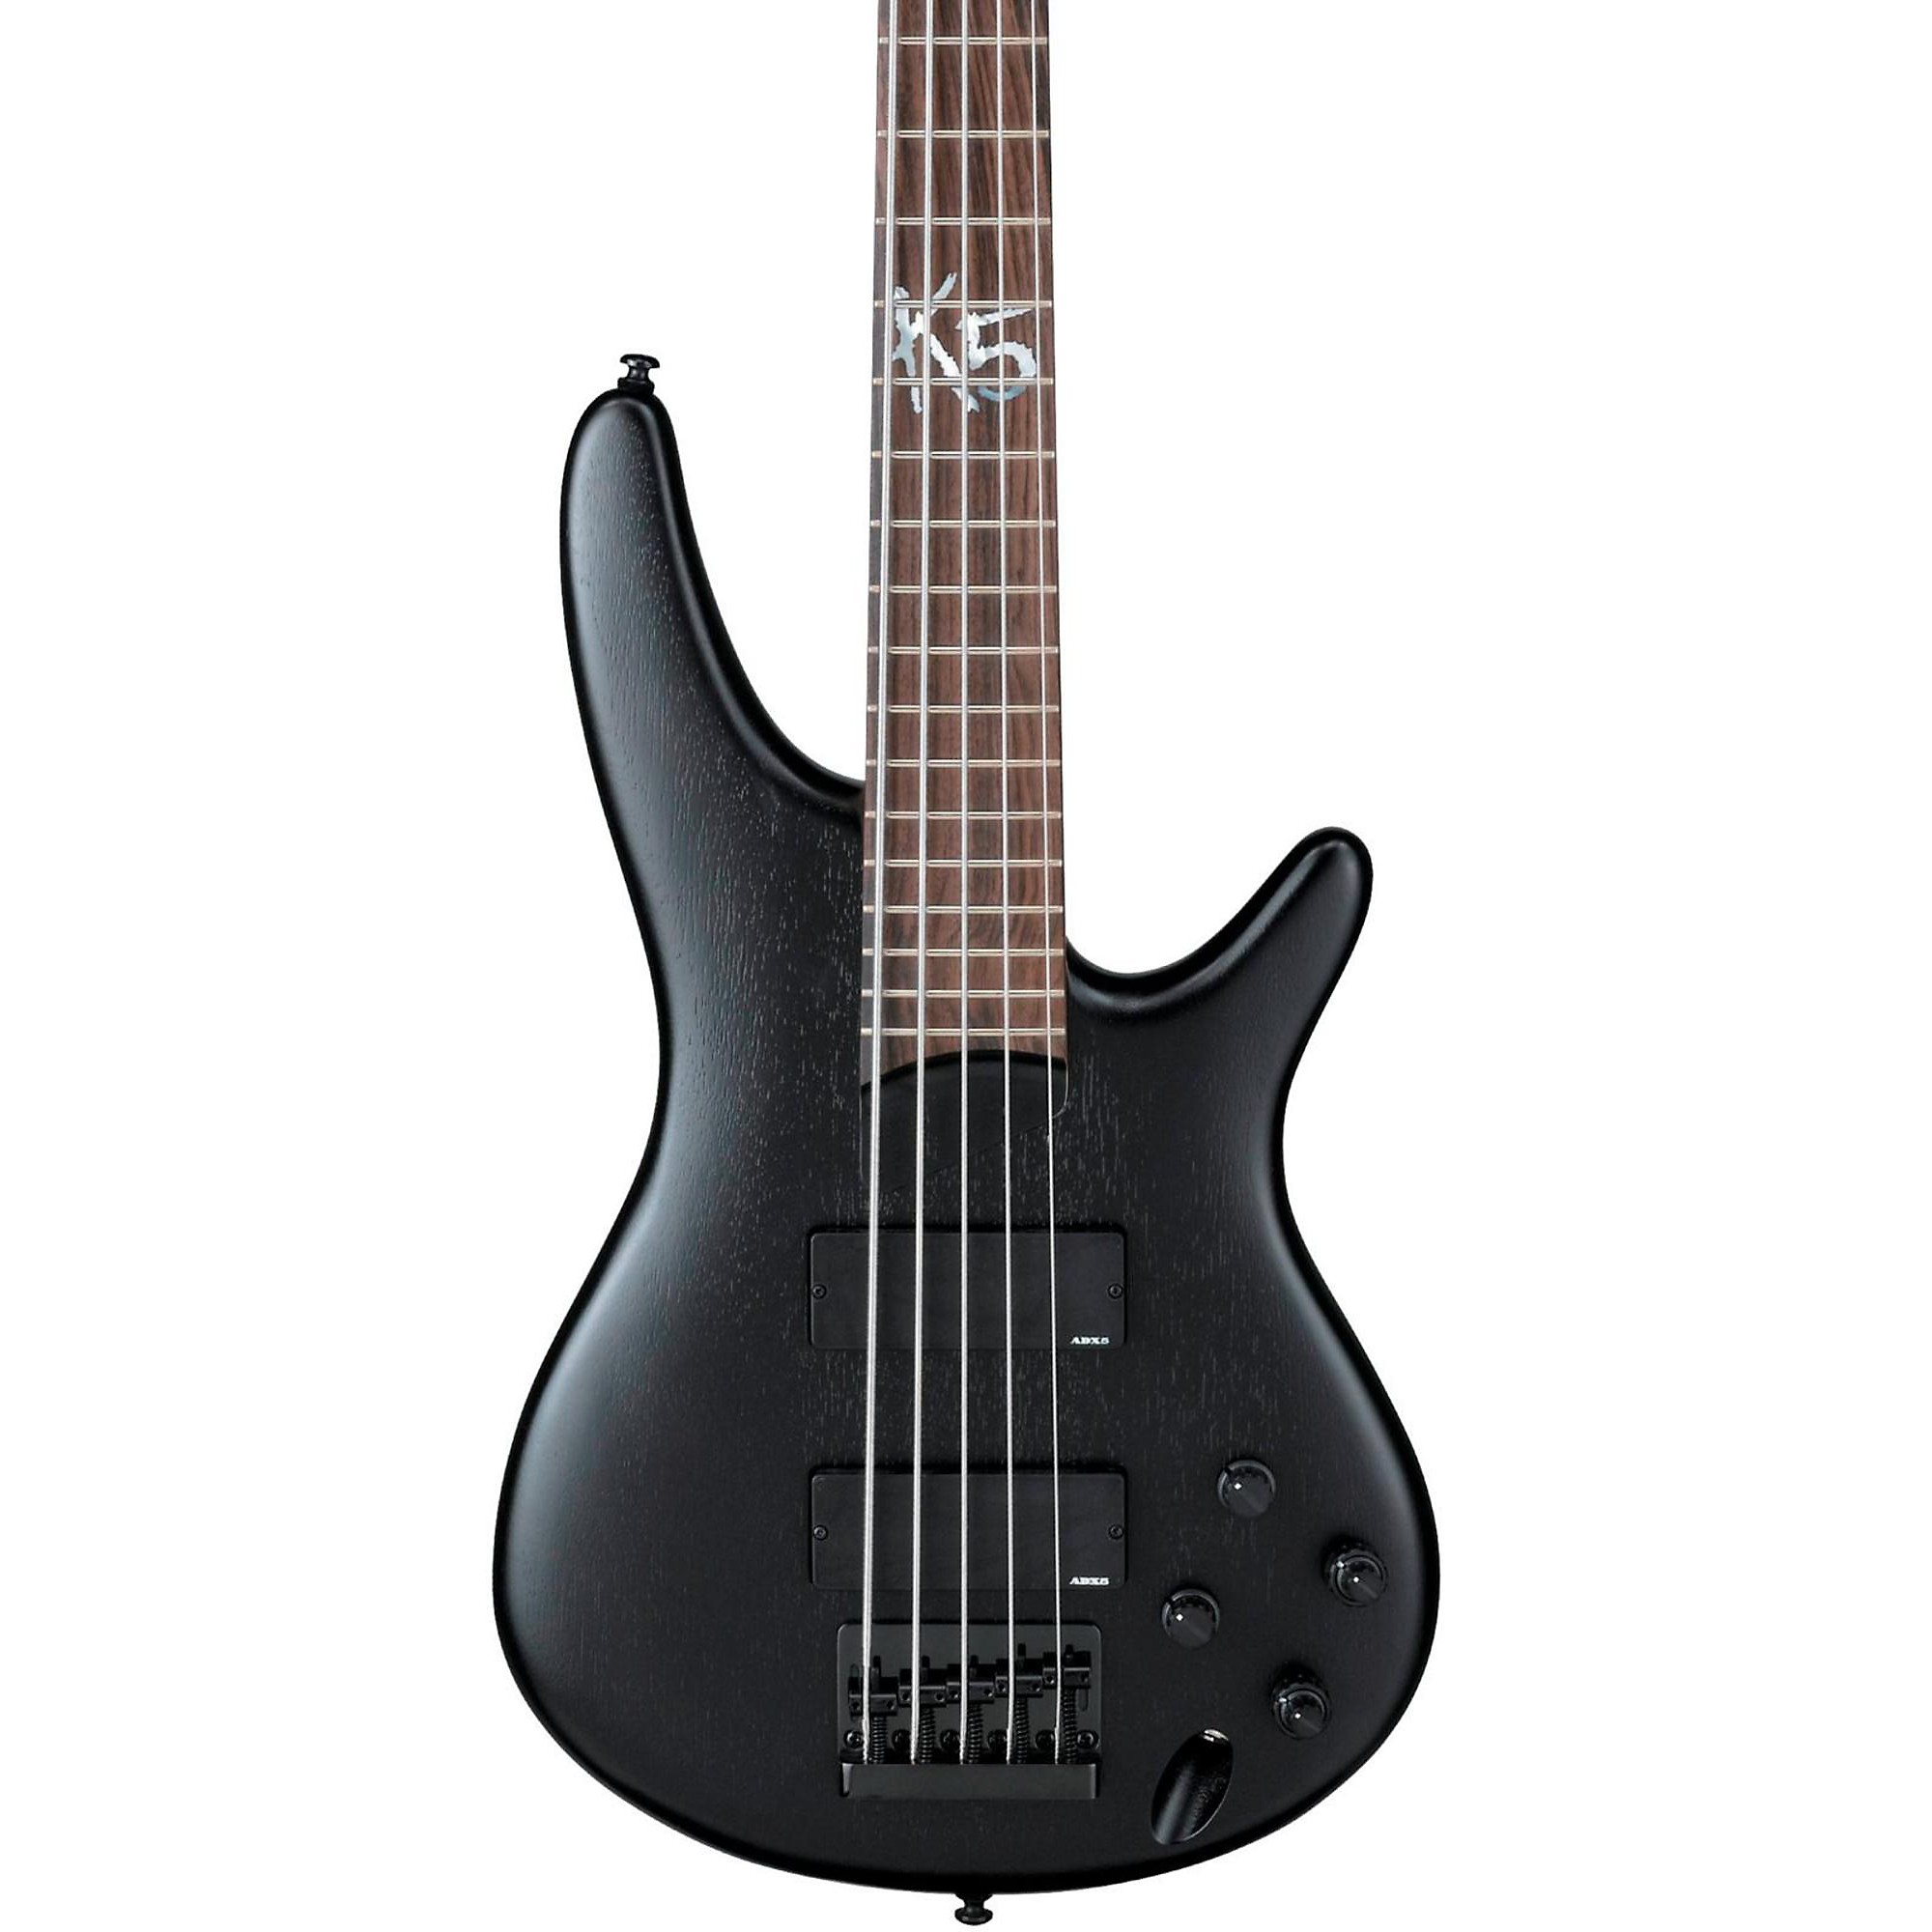 Ibanez electric bass guitar